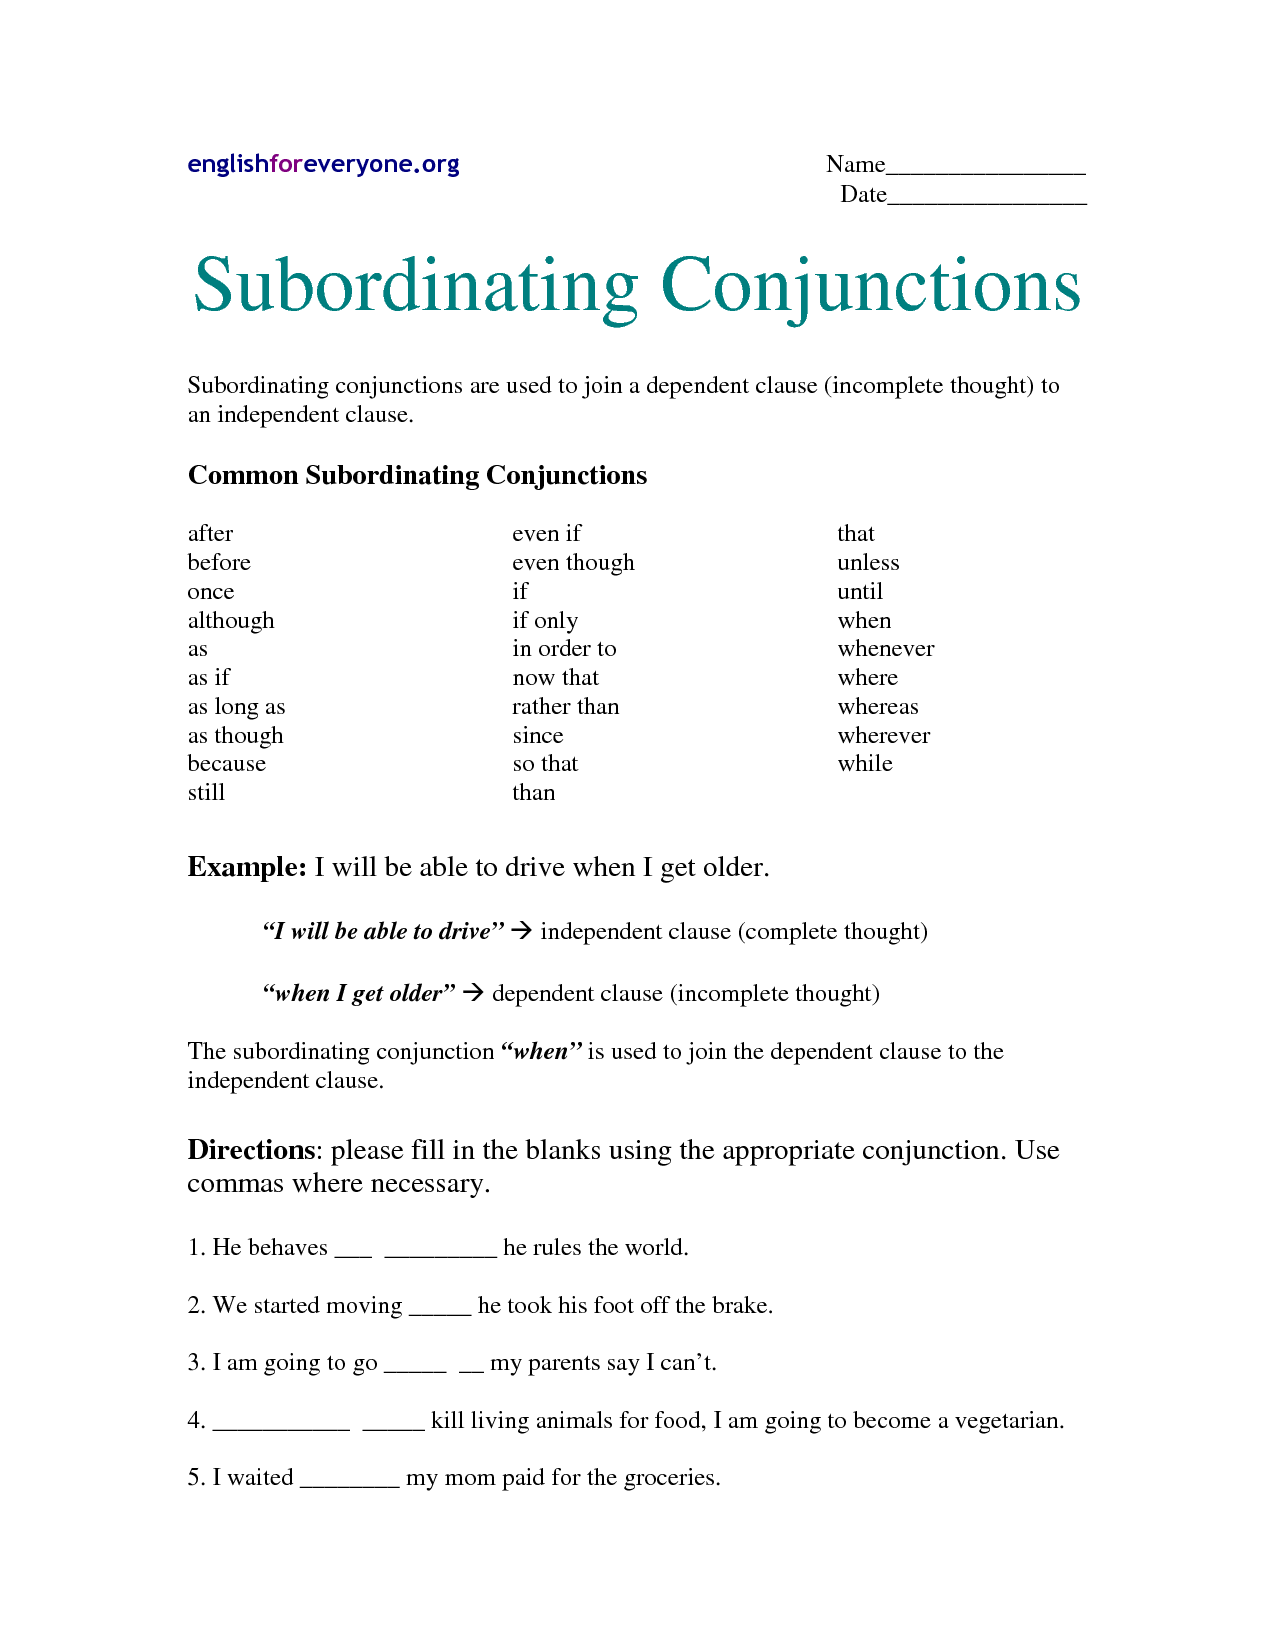 basic-coordinating-conjunctions-worksheet-education-pinterest-worksheets-english-and